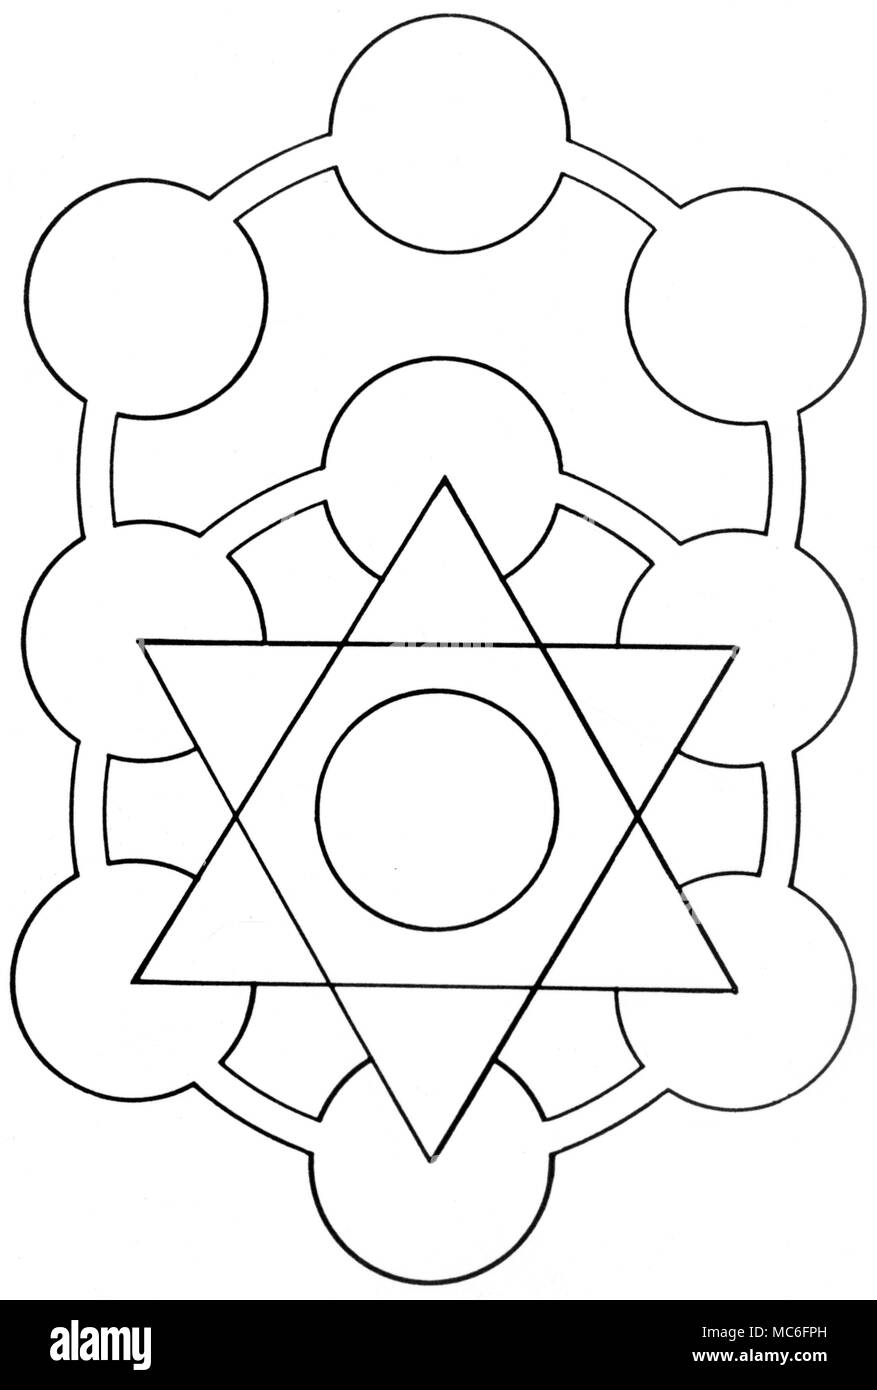 Simple diagram of the Sephirothic Tree, with the 22 paths between the Sephiroth. This diagram is one of several related patterns, used in cabbalistic meditation. Stock Photo